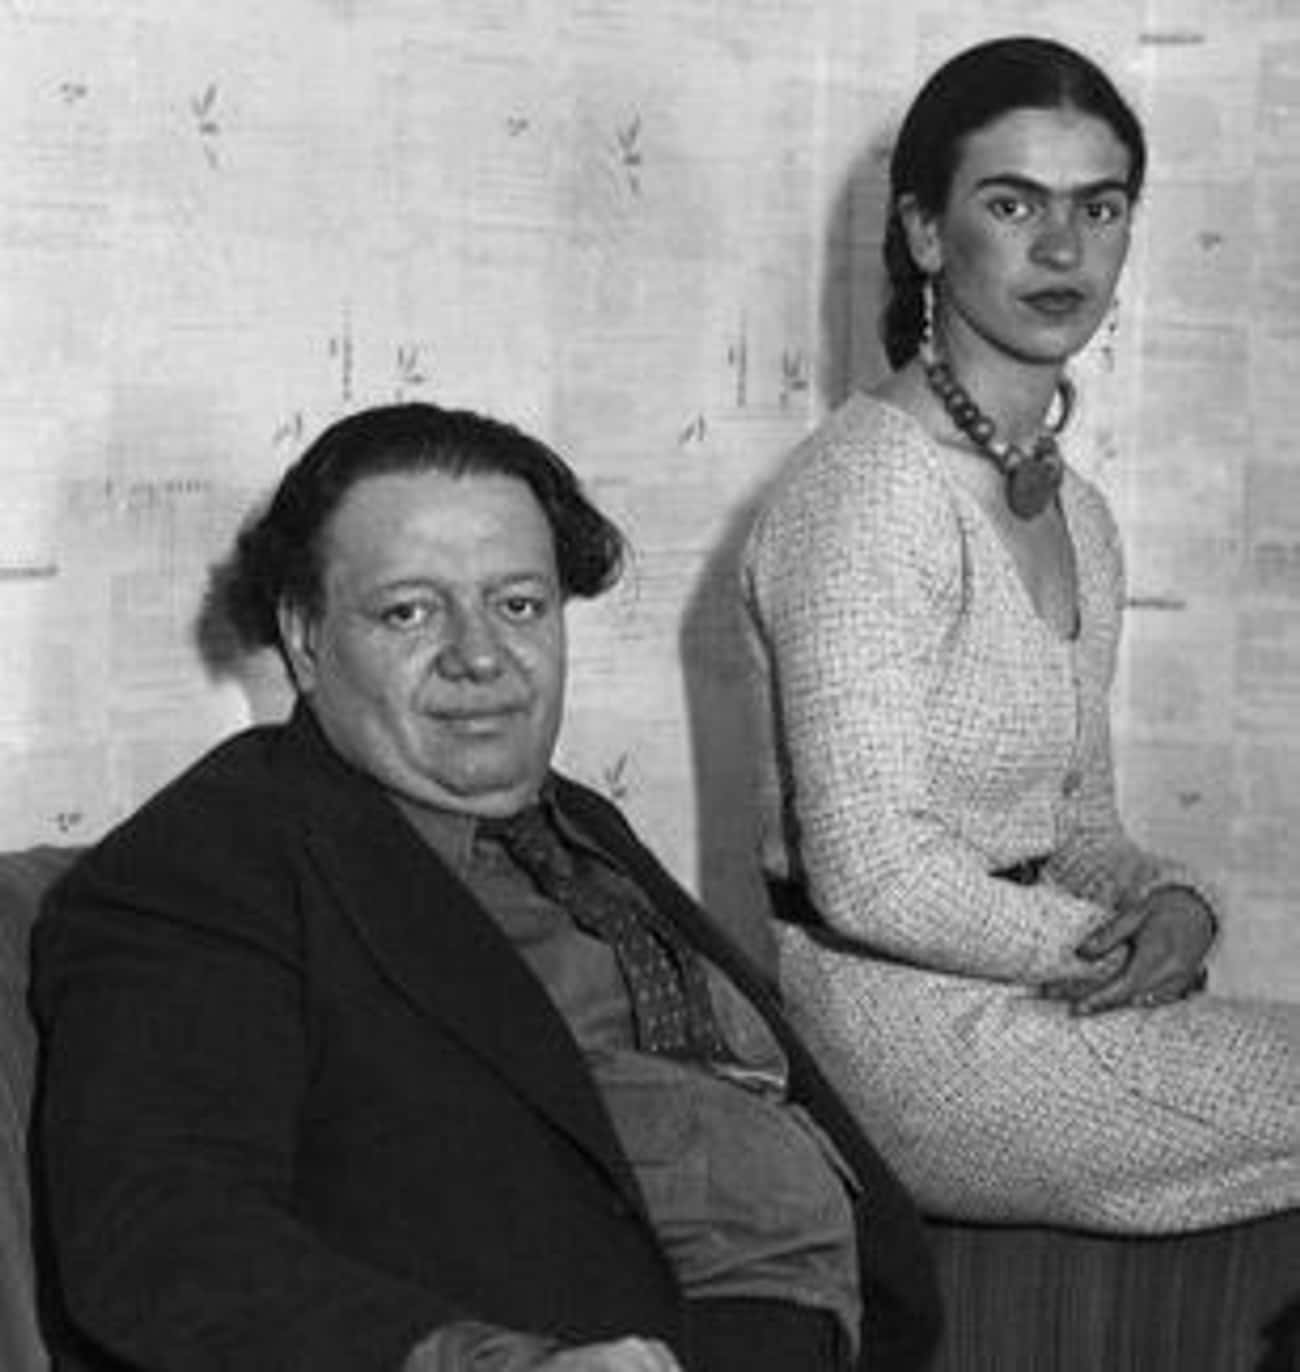 Frida Kahlo Described Diego Rivera As One Of 'Two Great Accidents' In Her Life